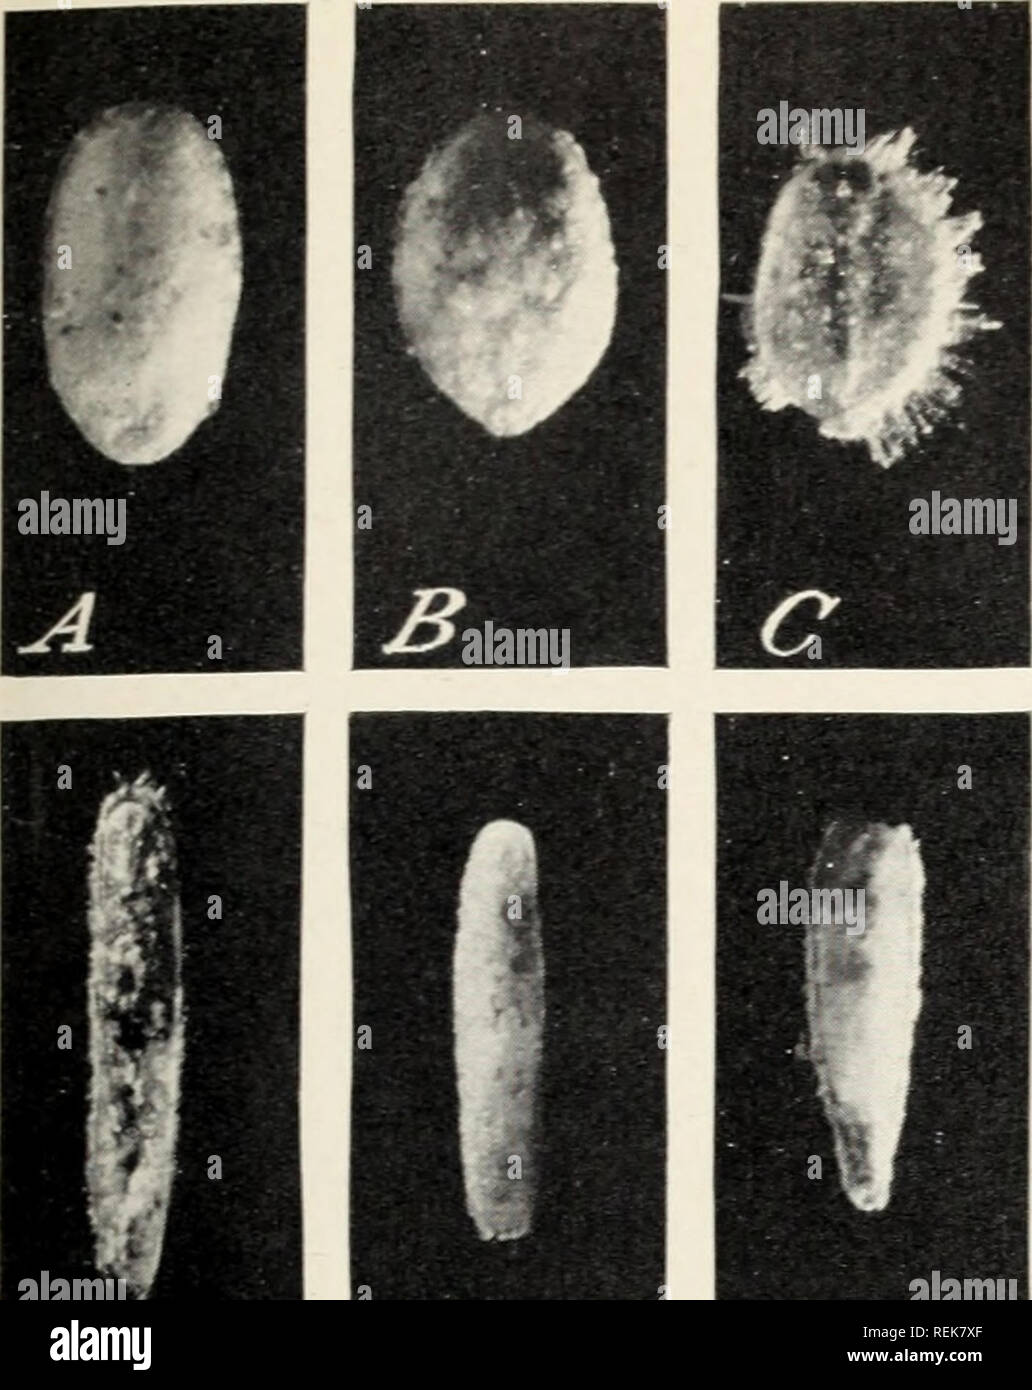 A Classification Of The Scale Insect Genus Asterolecanium Asterolecanium Scale Insects Miscellaneous Publication 424 U S Dept Of Agriculture Plate 9 D Y I K 1 J 0 I H M